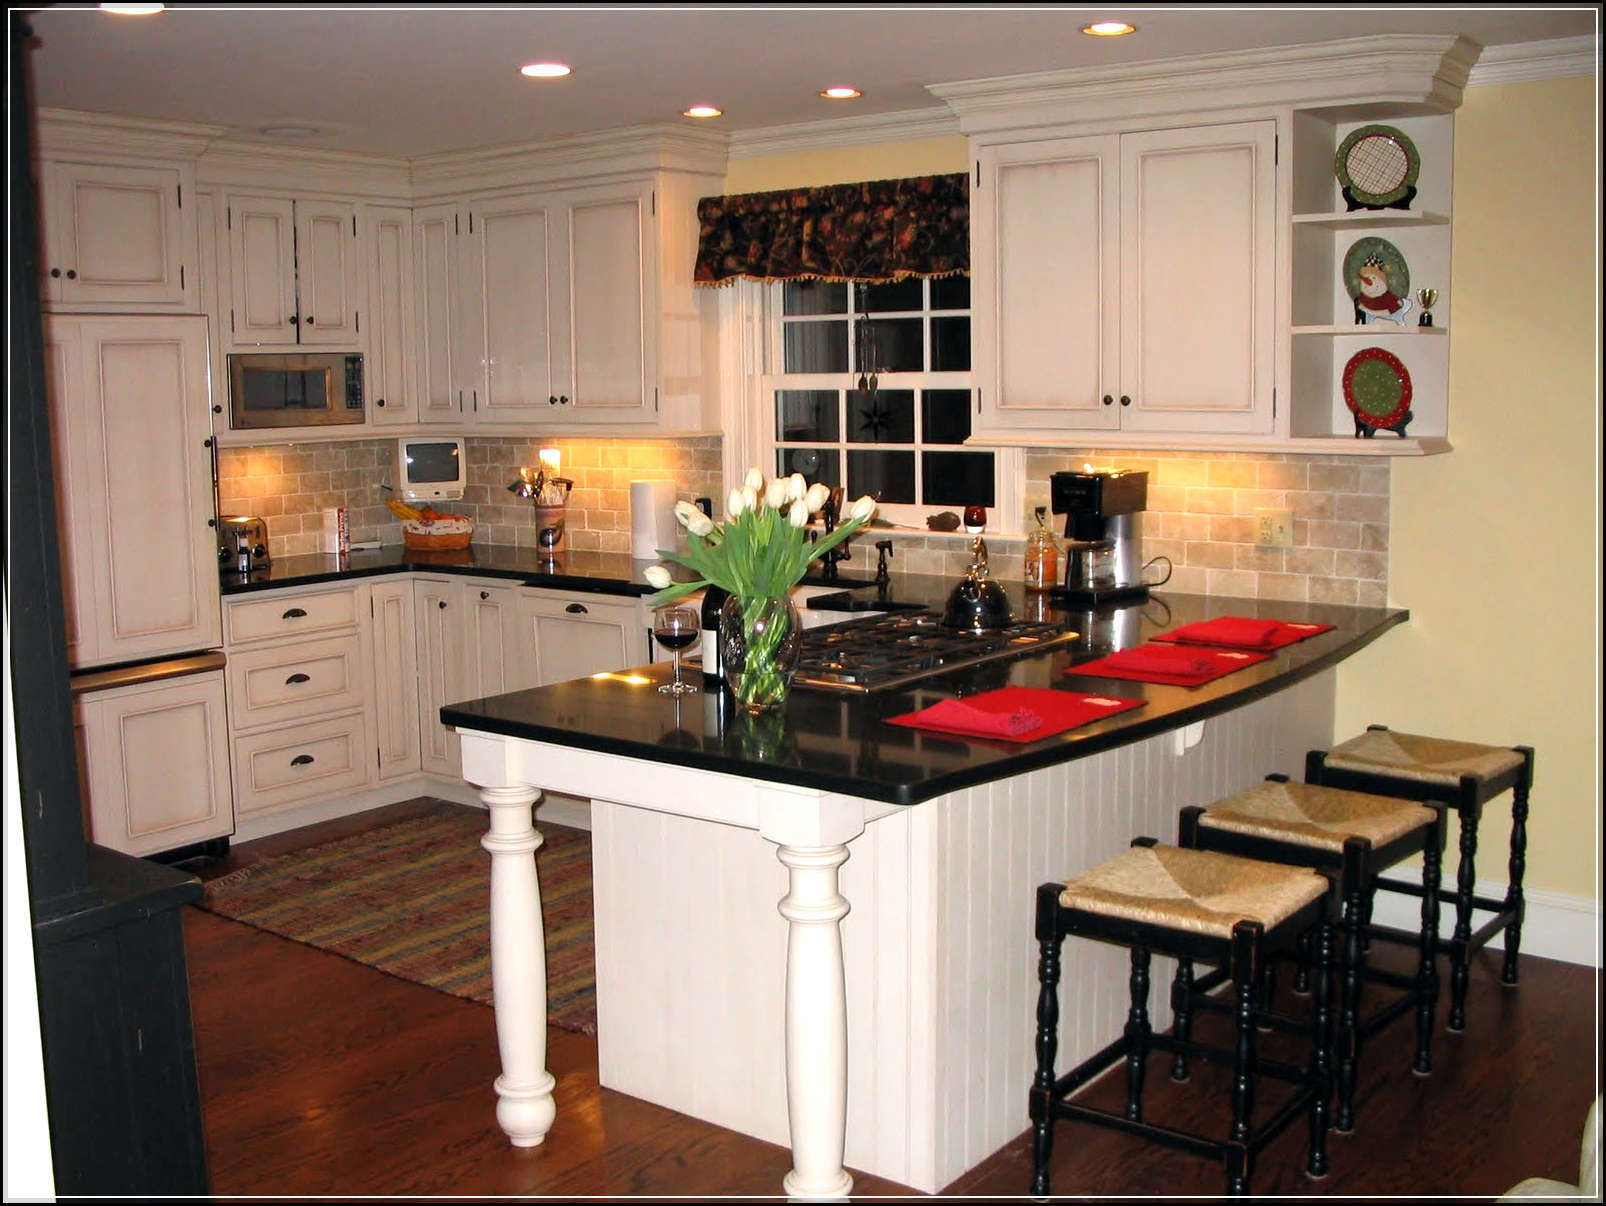 Diy Refinishing Kitchen Cabinets
 How to Refinish Kitchen Cabinets with DIY Style